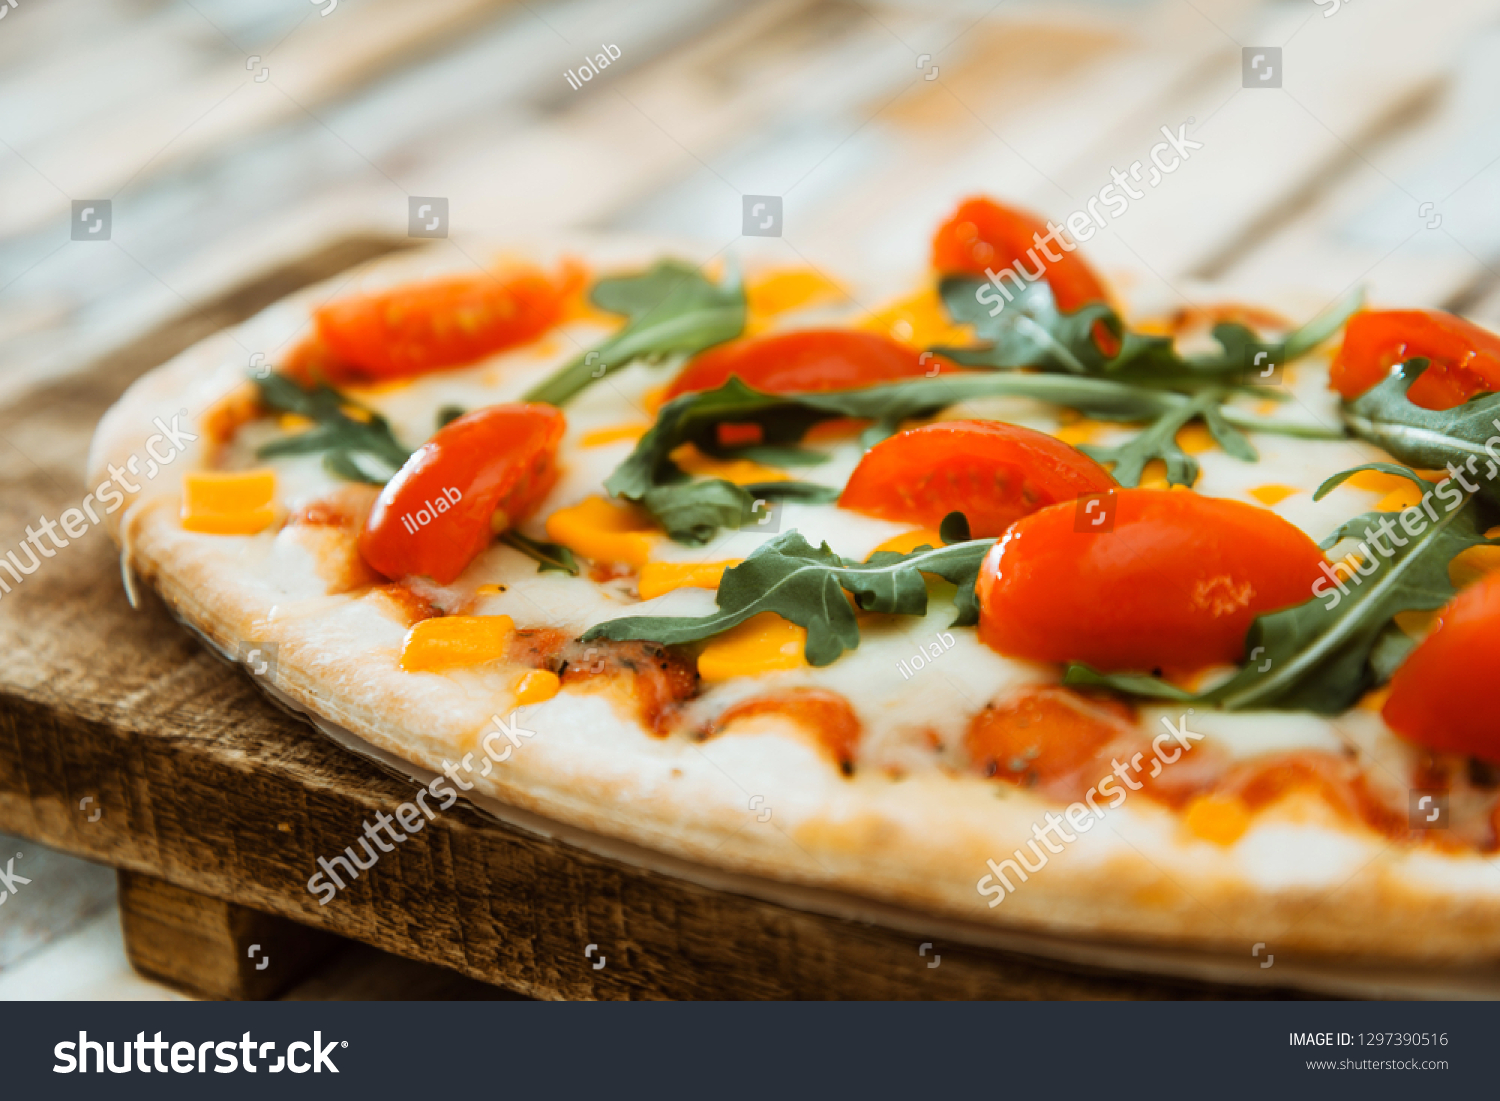 Pizza Mozzarella Emmental Cheddar Cheese Stock Photo Edit Now 1297390516,Part Time Data Entry Jobs From Home